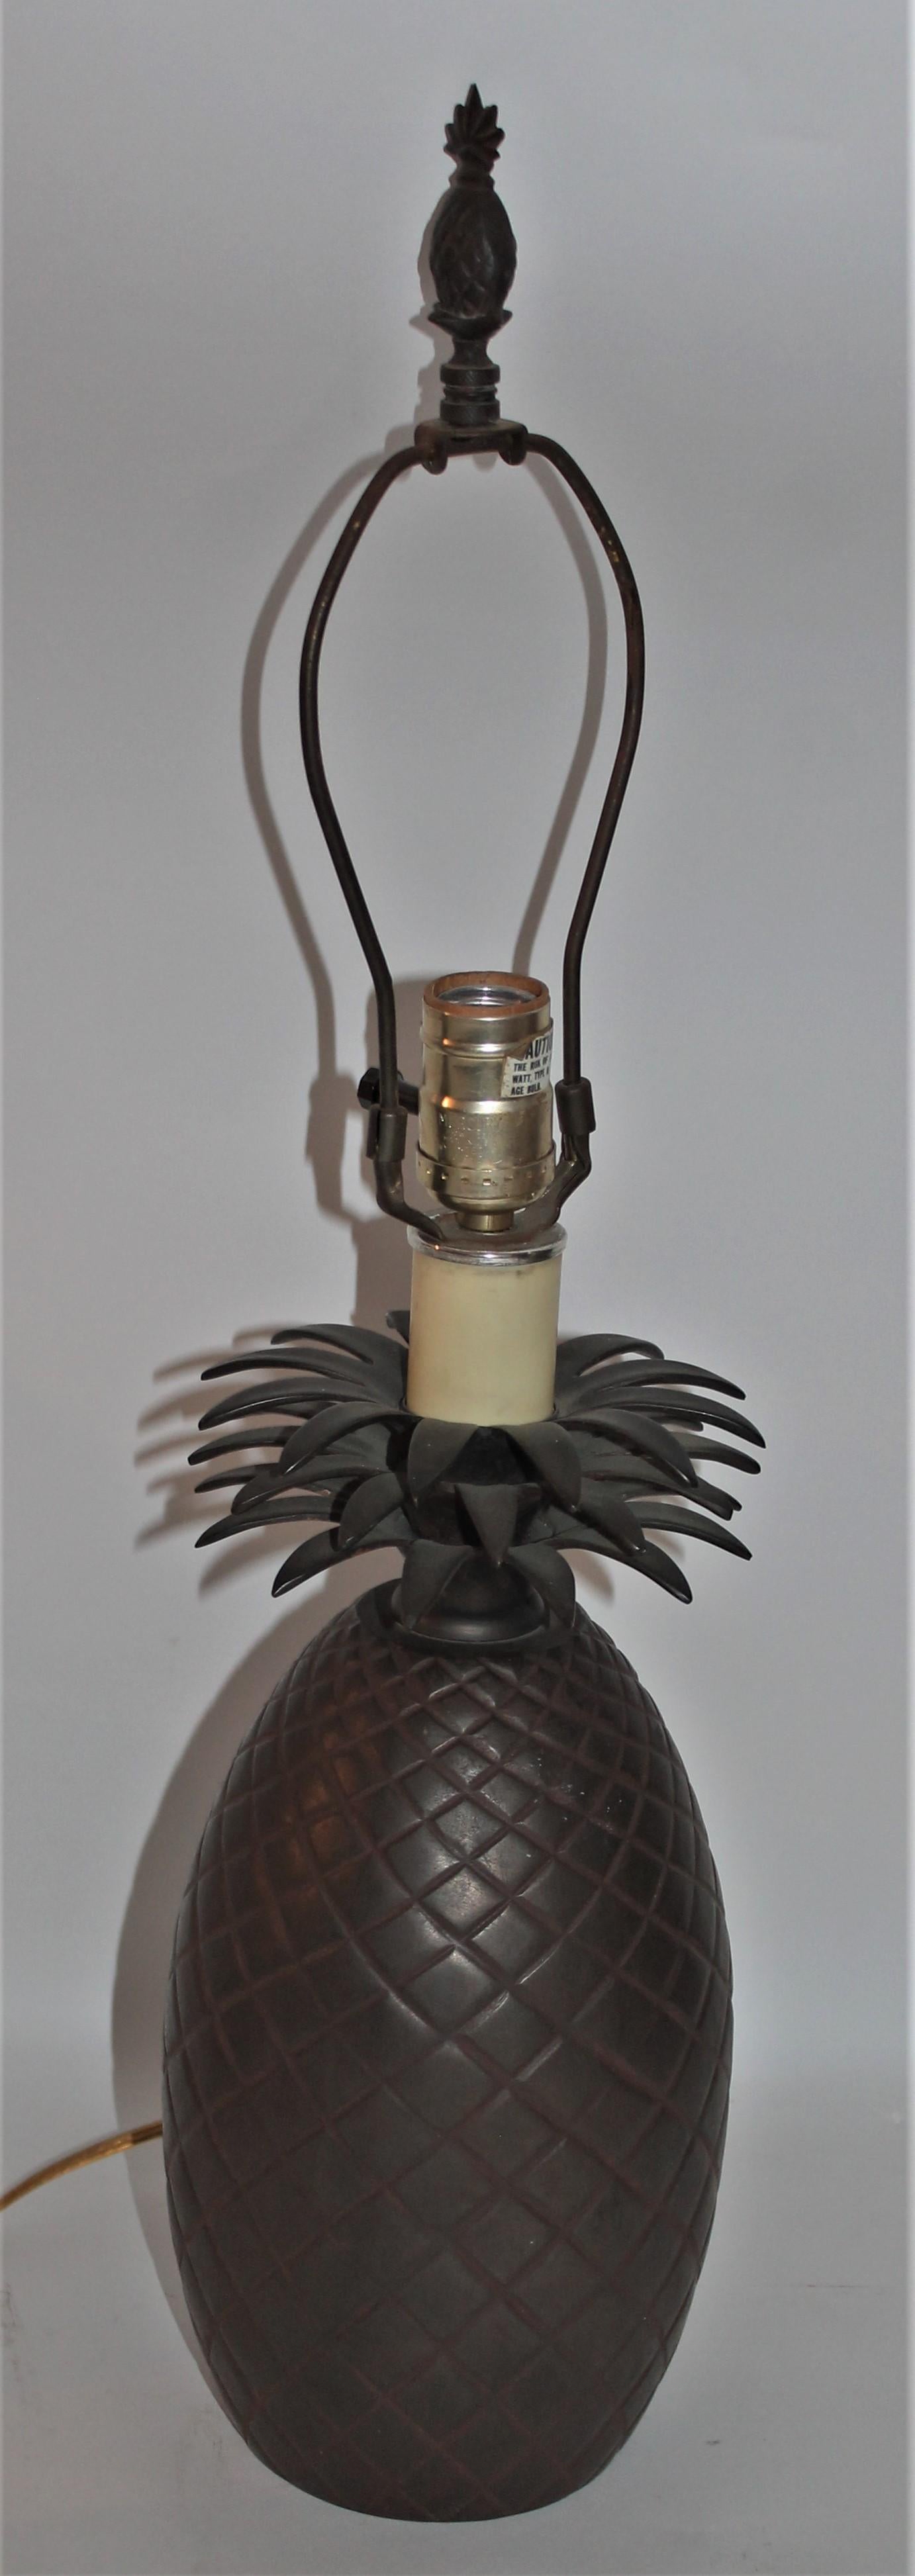 This vintage solid brass pineapple table lamp is in Fine as found condition. It is newly wired and has a brass finial that is a pineapple shape as well. The lamp is in working order. The lamp has a great patina.